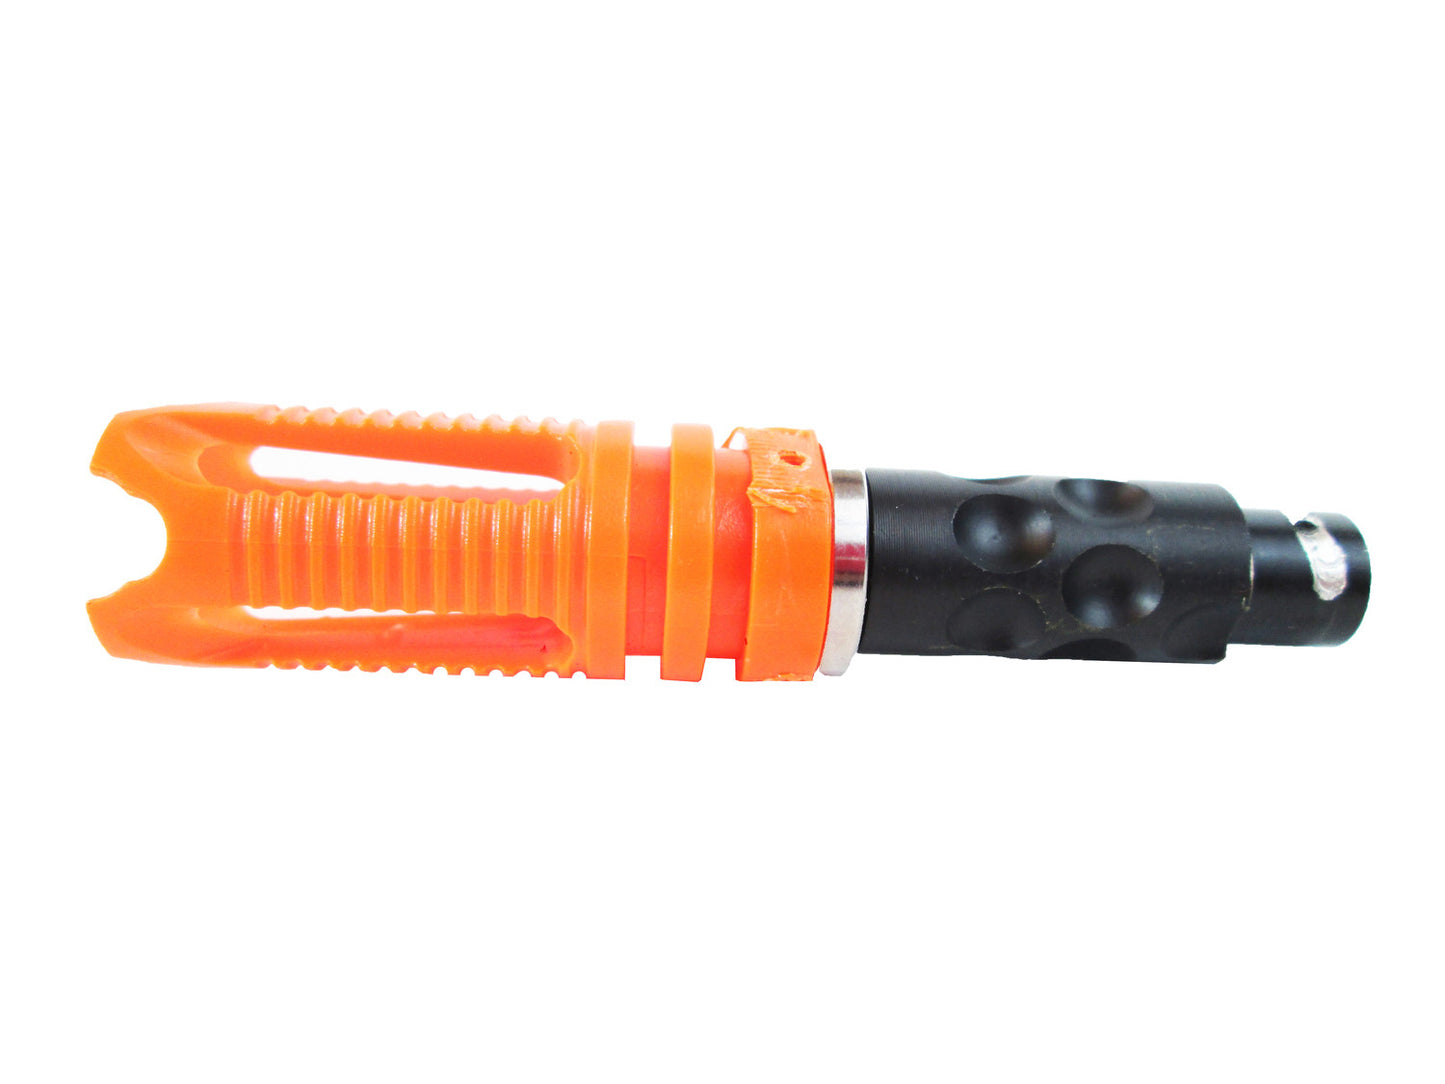 Dimpled PDW Flash Hider Attachment